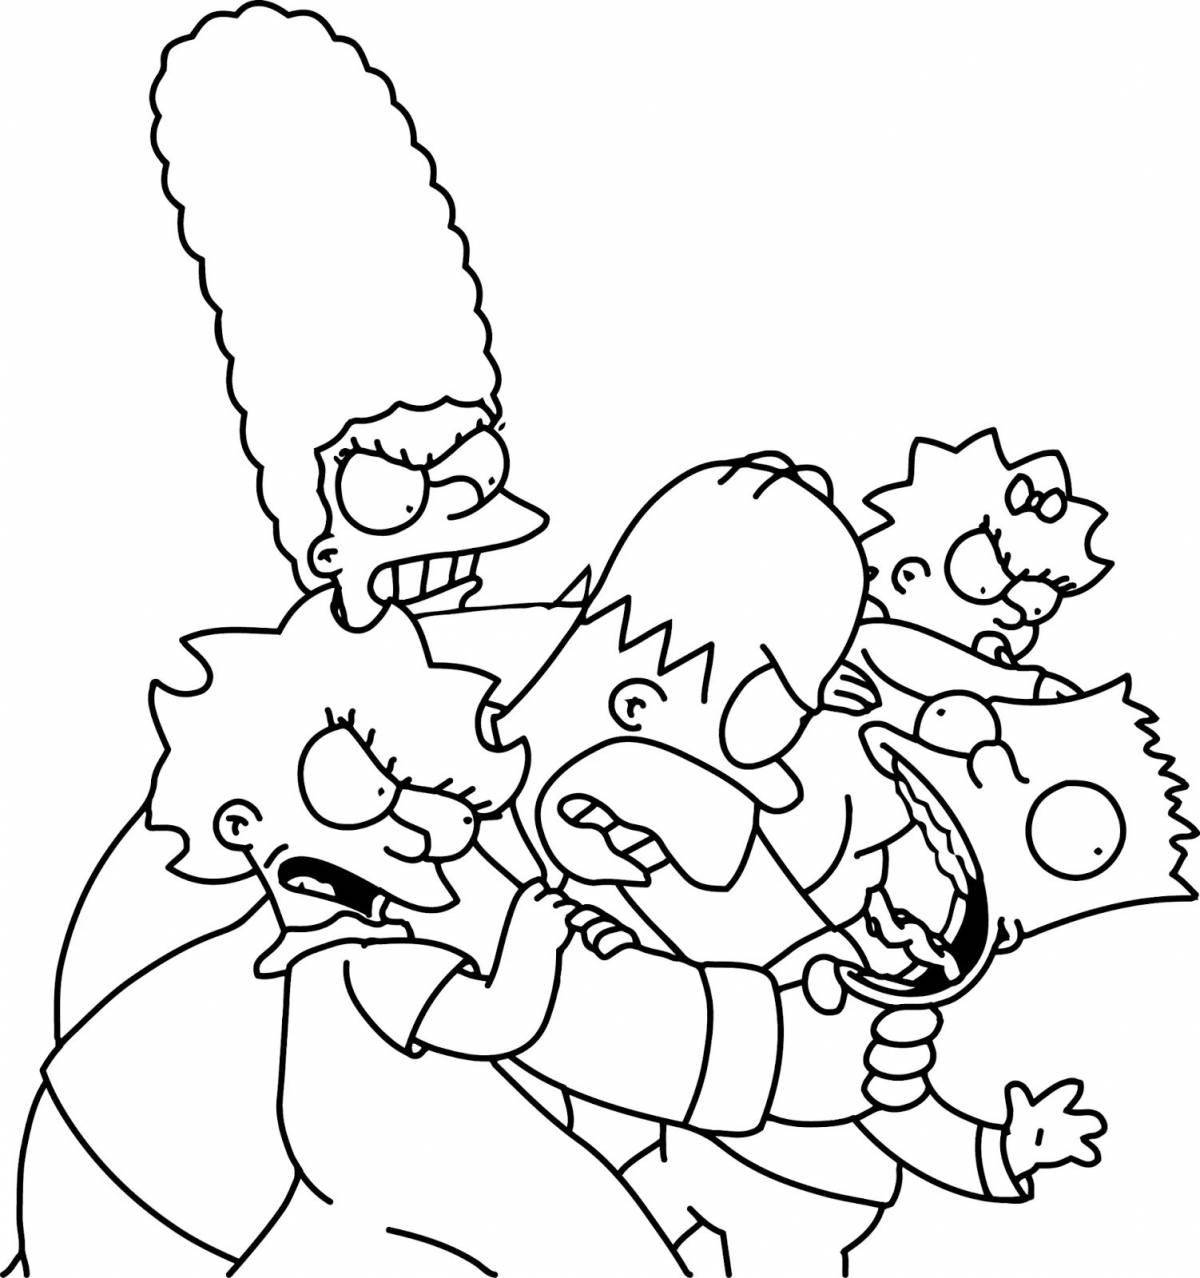 Color-frenzy lisa simpson coloring page